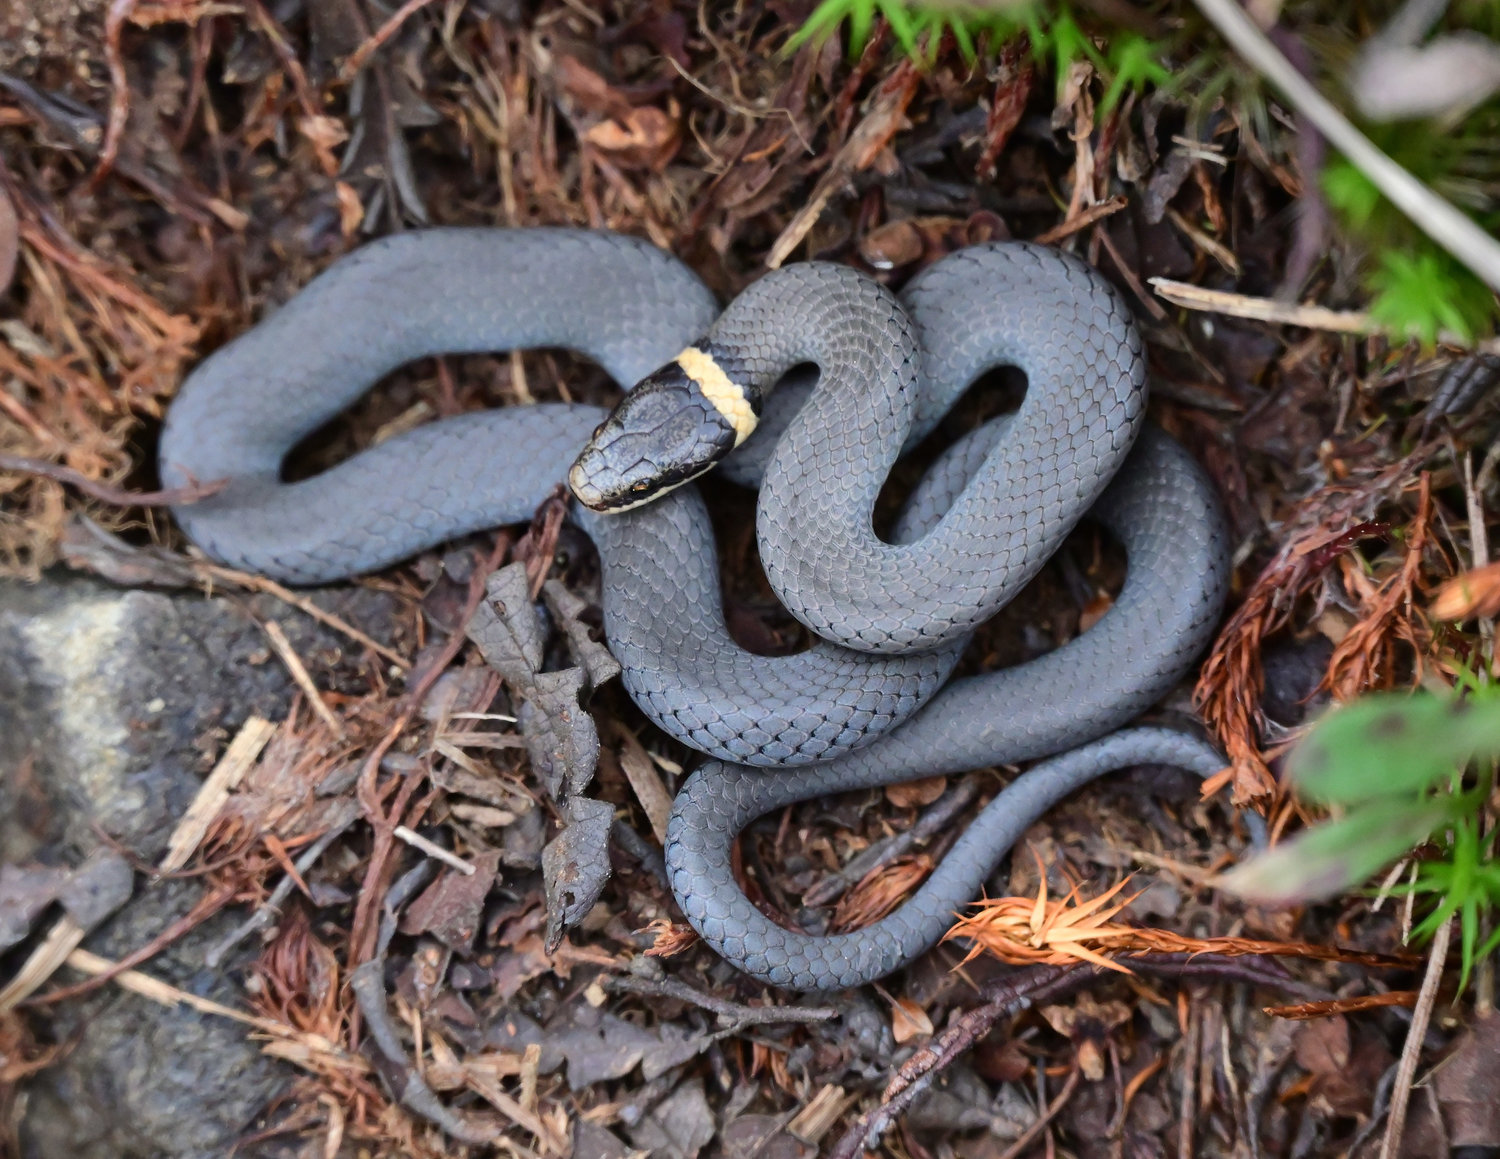 Northern ring-necked snakes, named for the orange ring just behind the head, are small snakes; over 12 inches is considered a large specimen. To ward off predators, the ring-necked snake may roll onto its back and display its bright orange belly. Its diet consists mainly of invertebrates and salamanders.